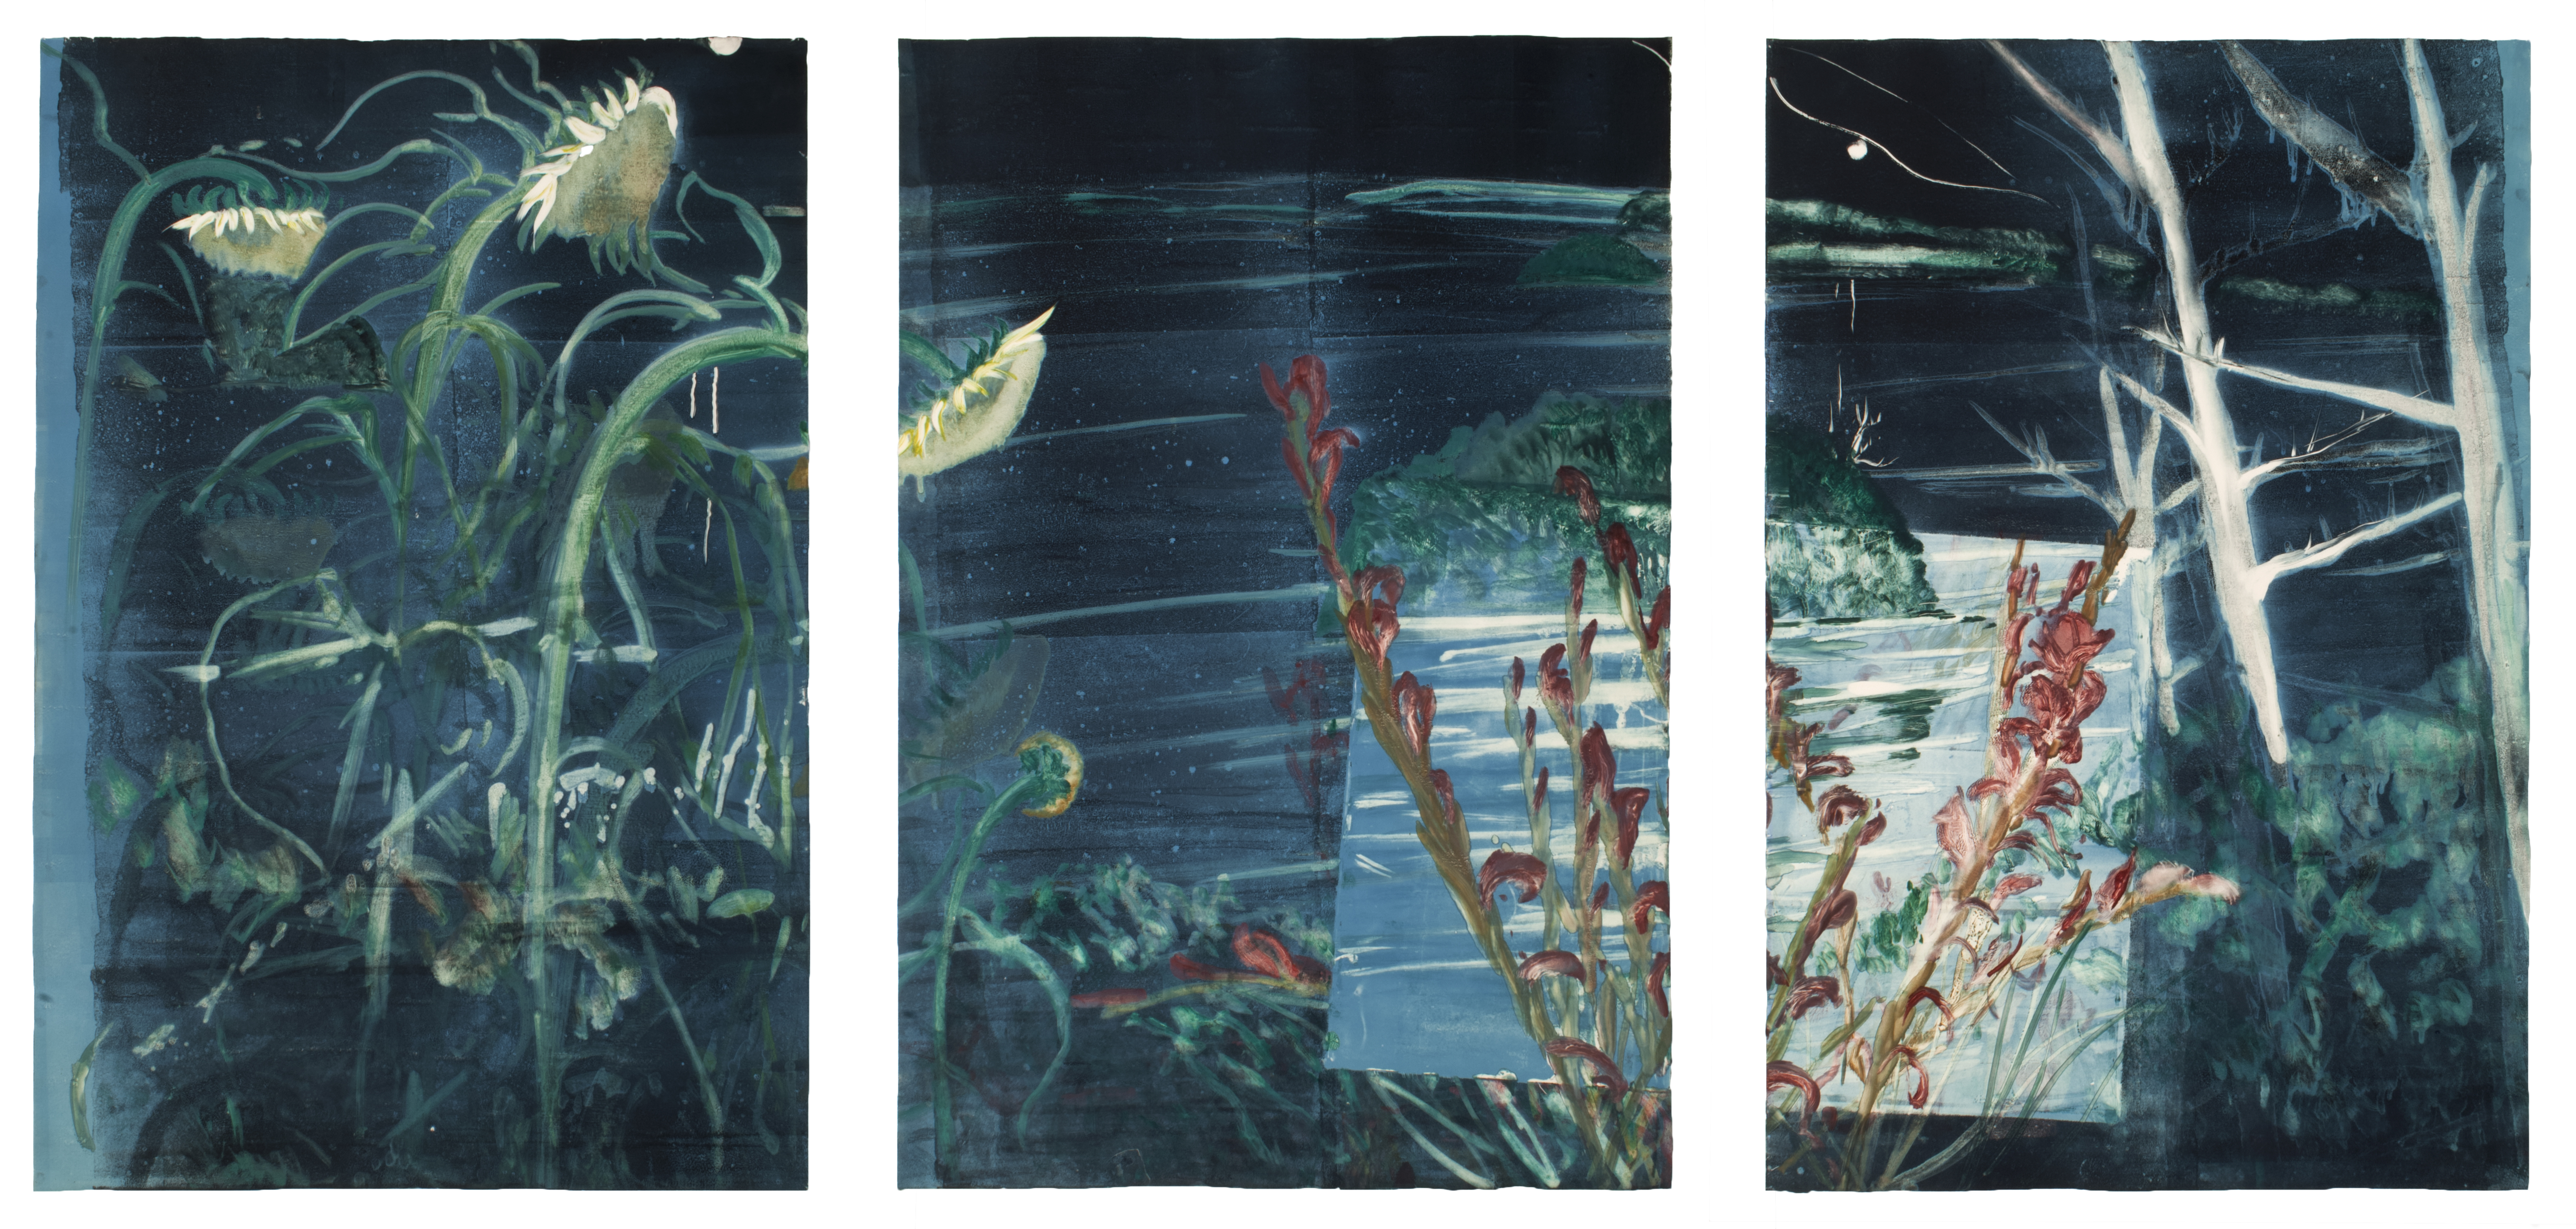 Small Wakeby Night III, 1982, Color monotype on three sheets47 3/8 x 31 5/8 inches (120.3 x 80.3 cm) each